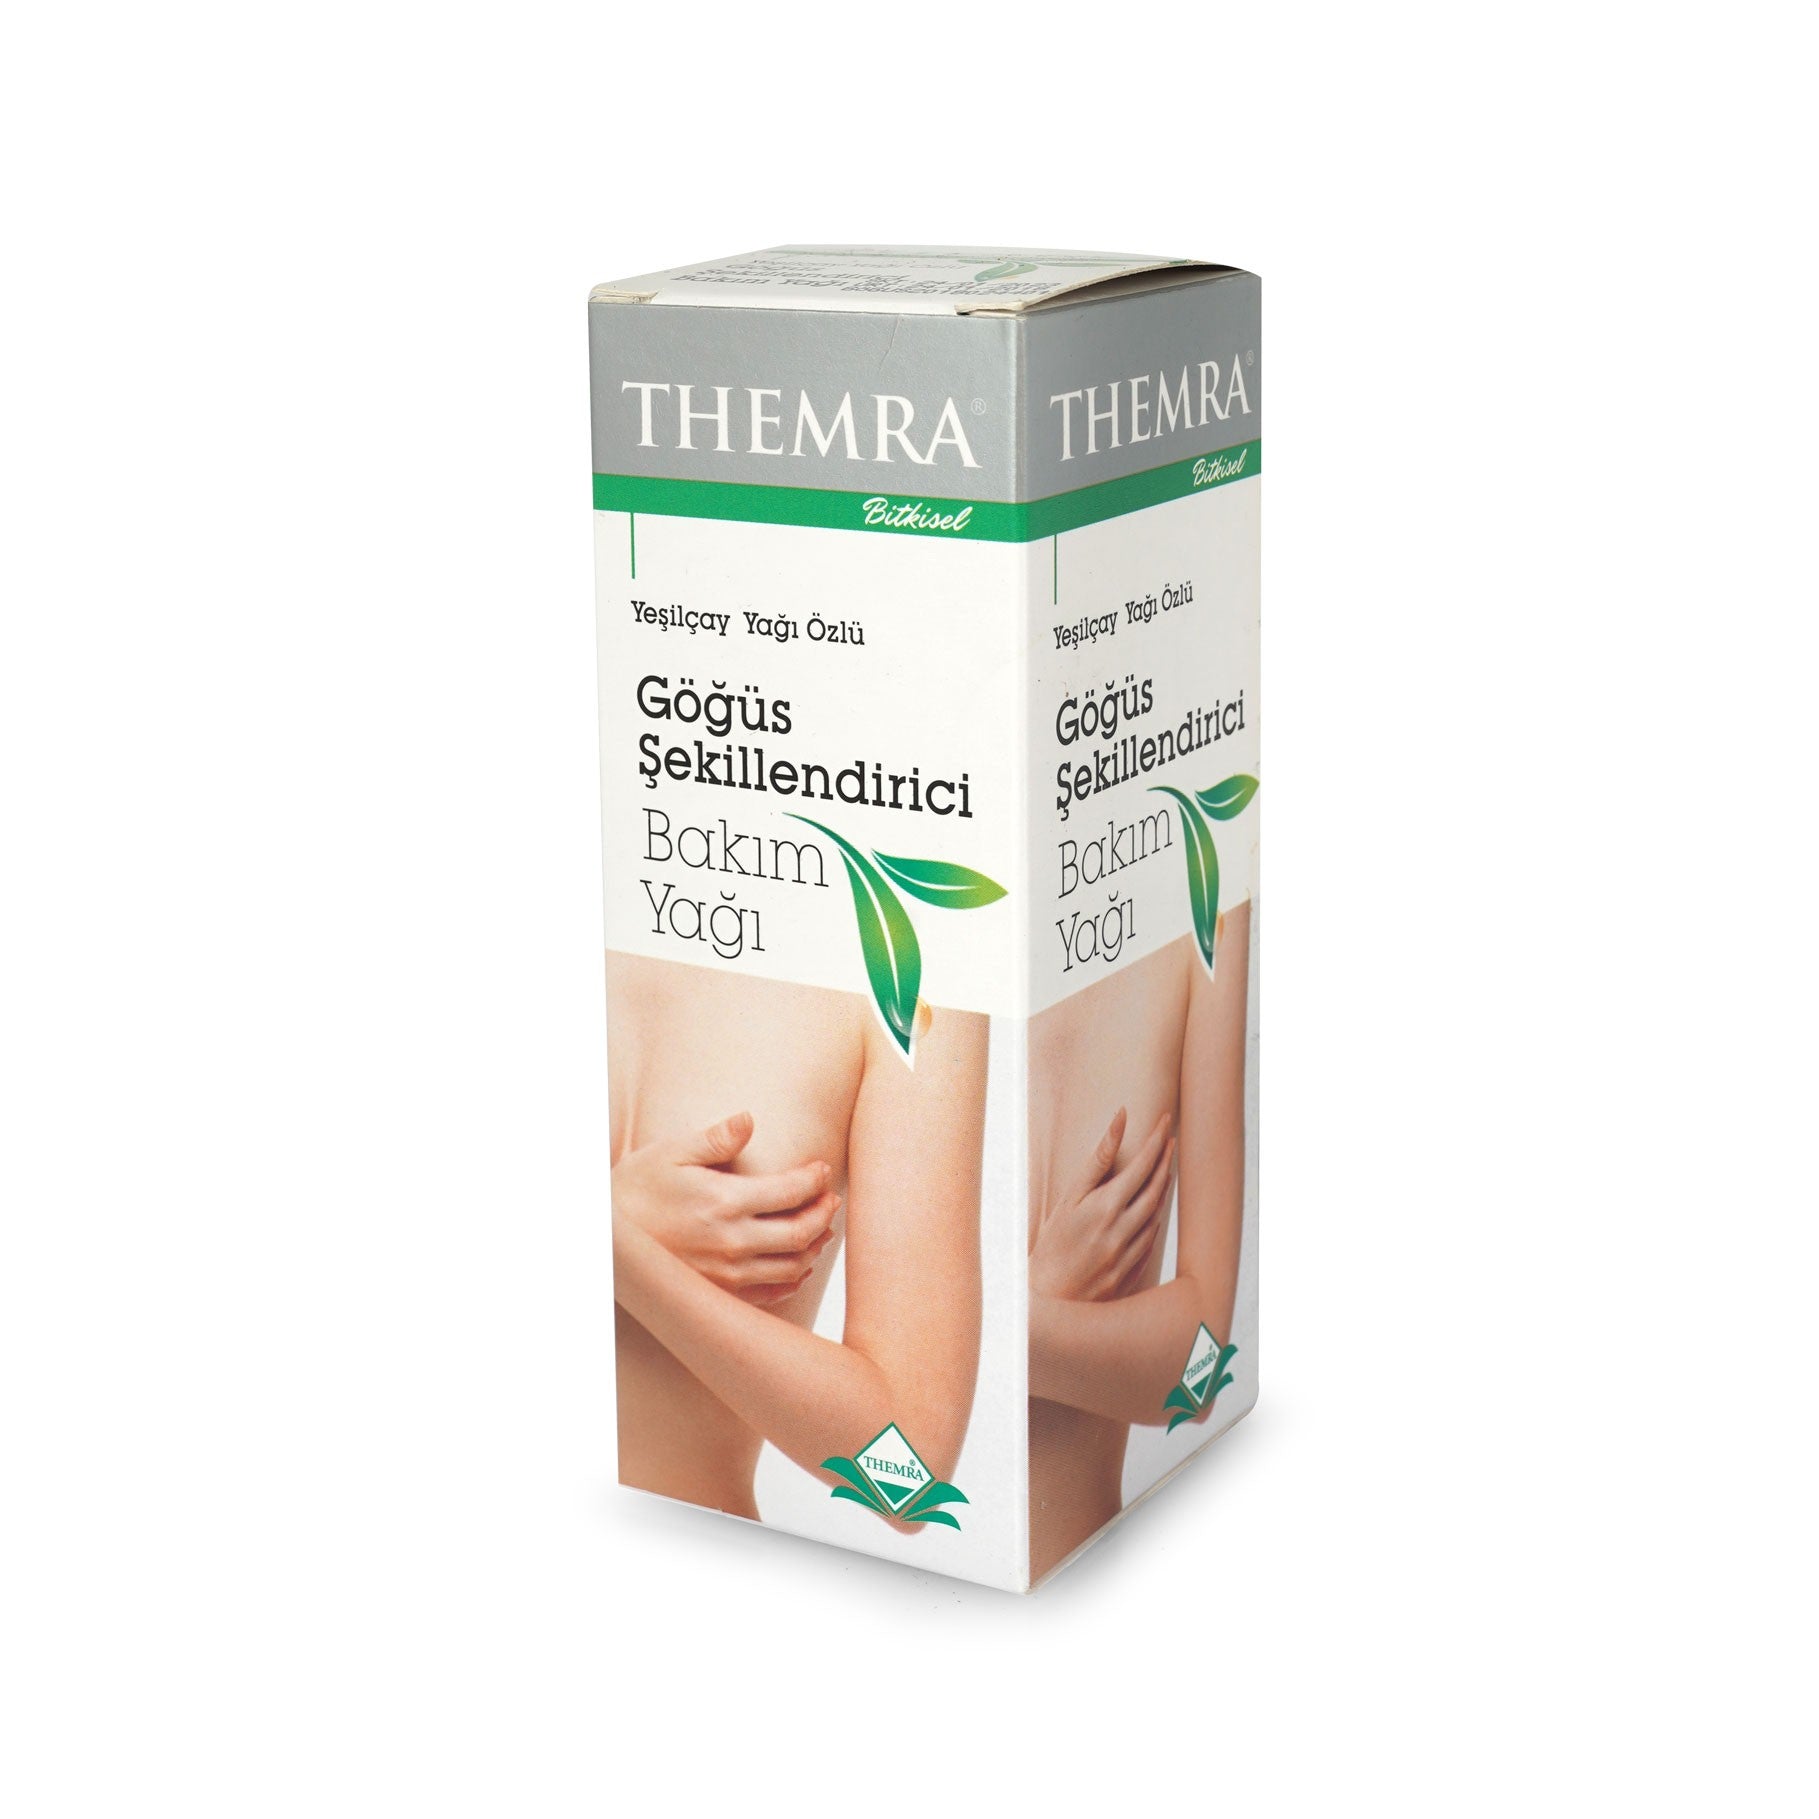 Themra BREAST SHAPING CARE OIL 100 ml